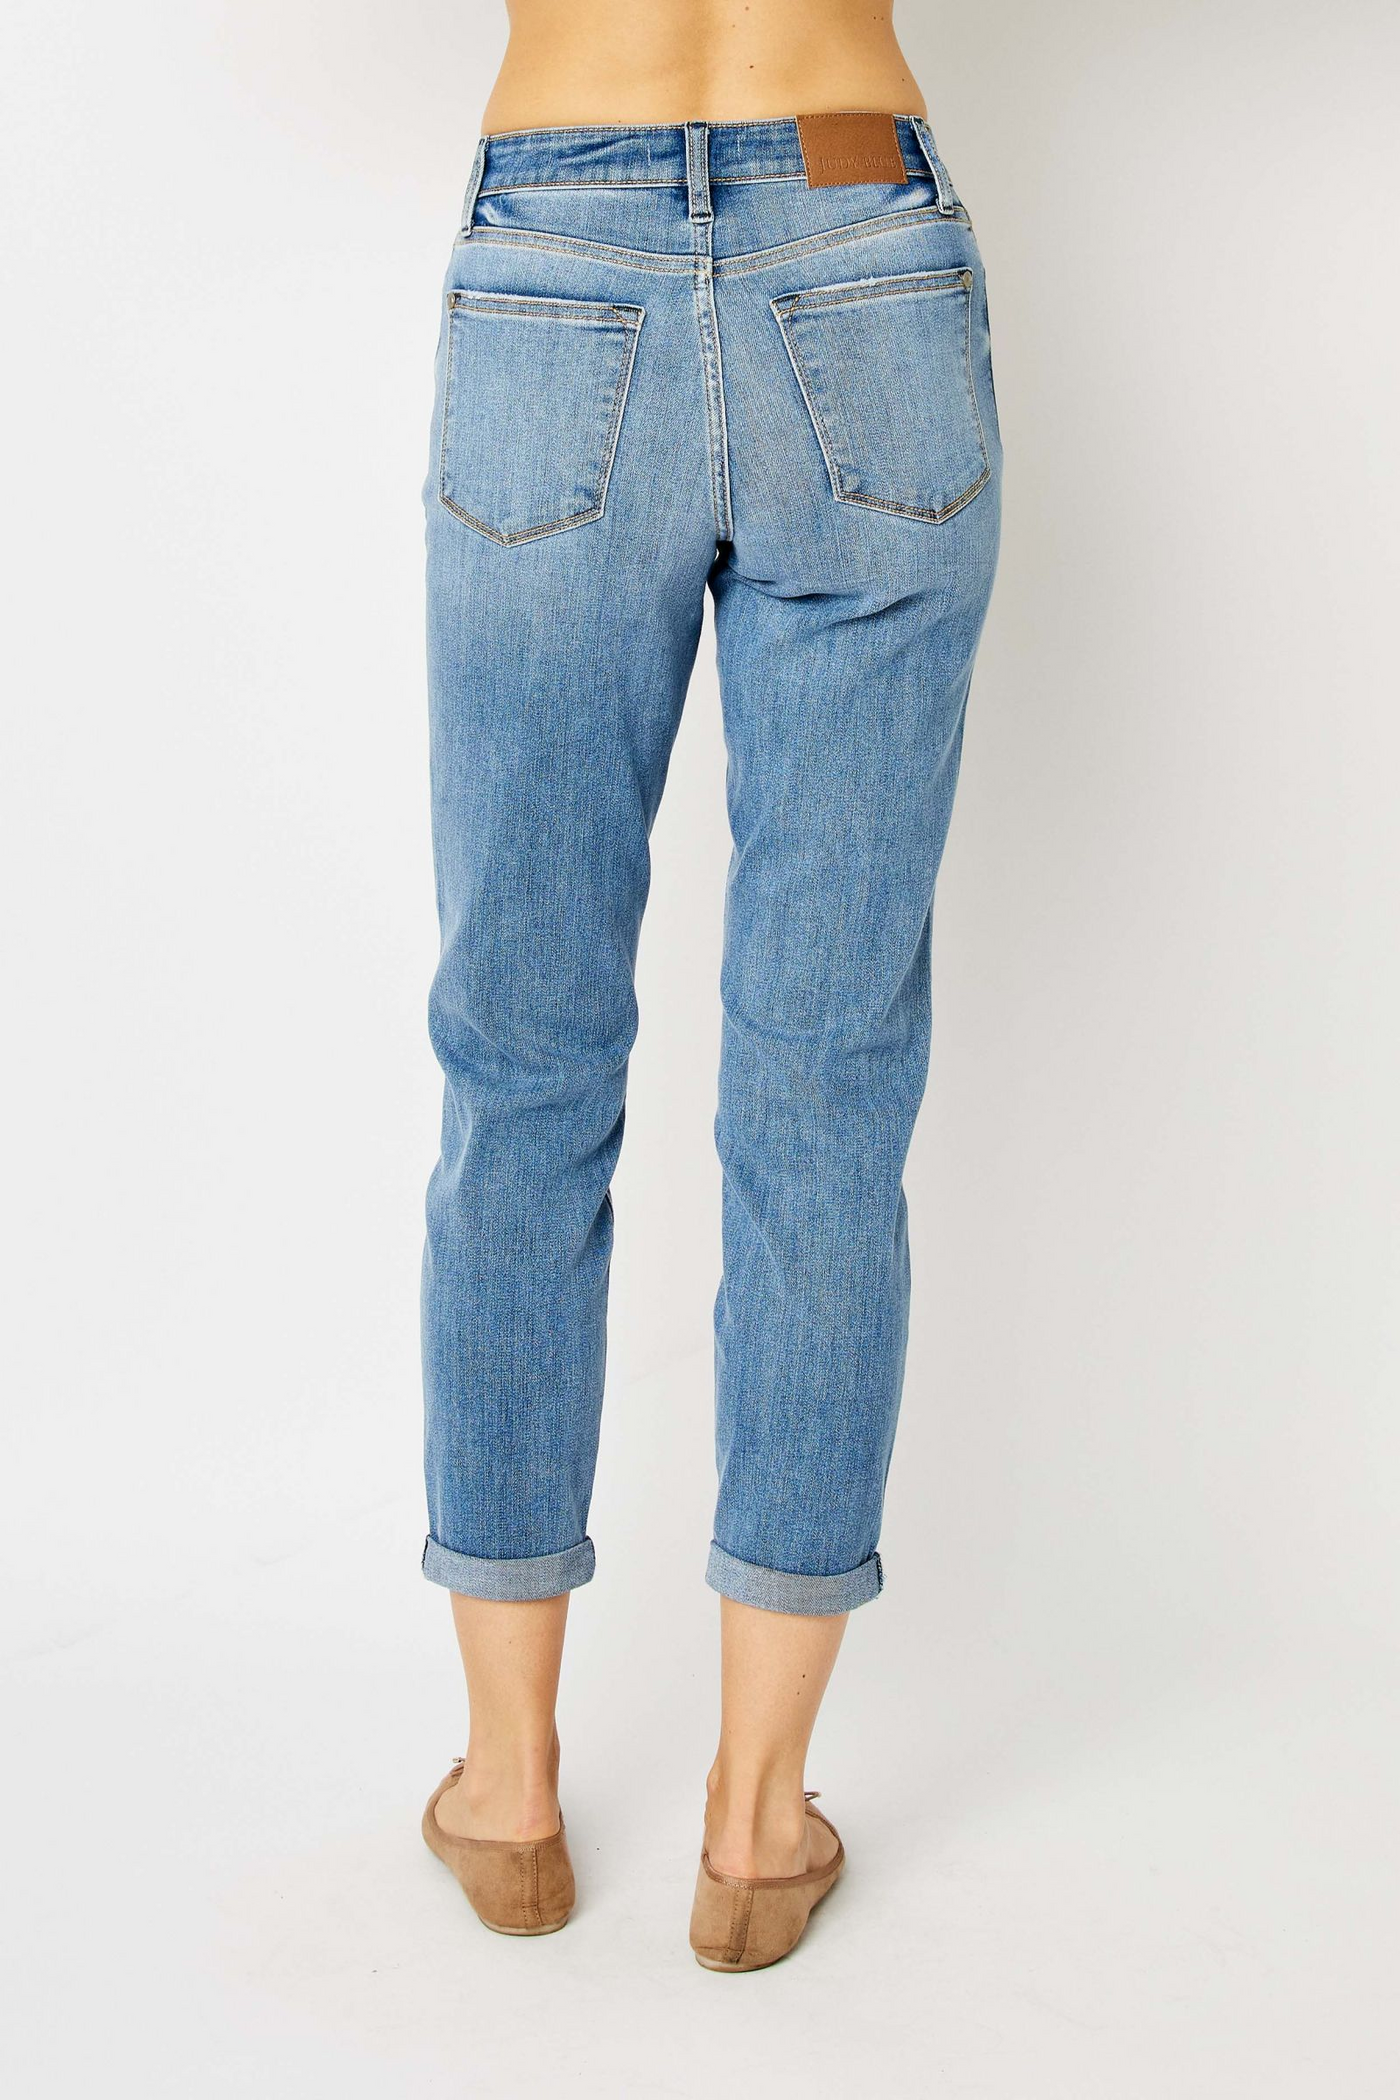 Judy Blue MR Perfect Everyday Cuffed Jeans